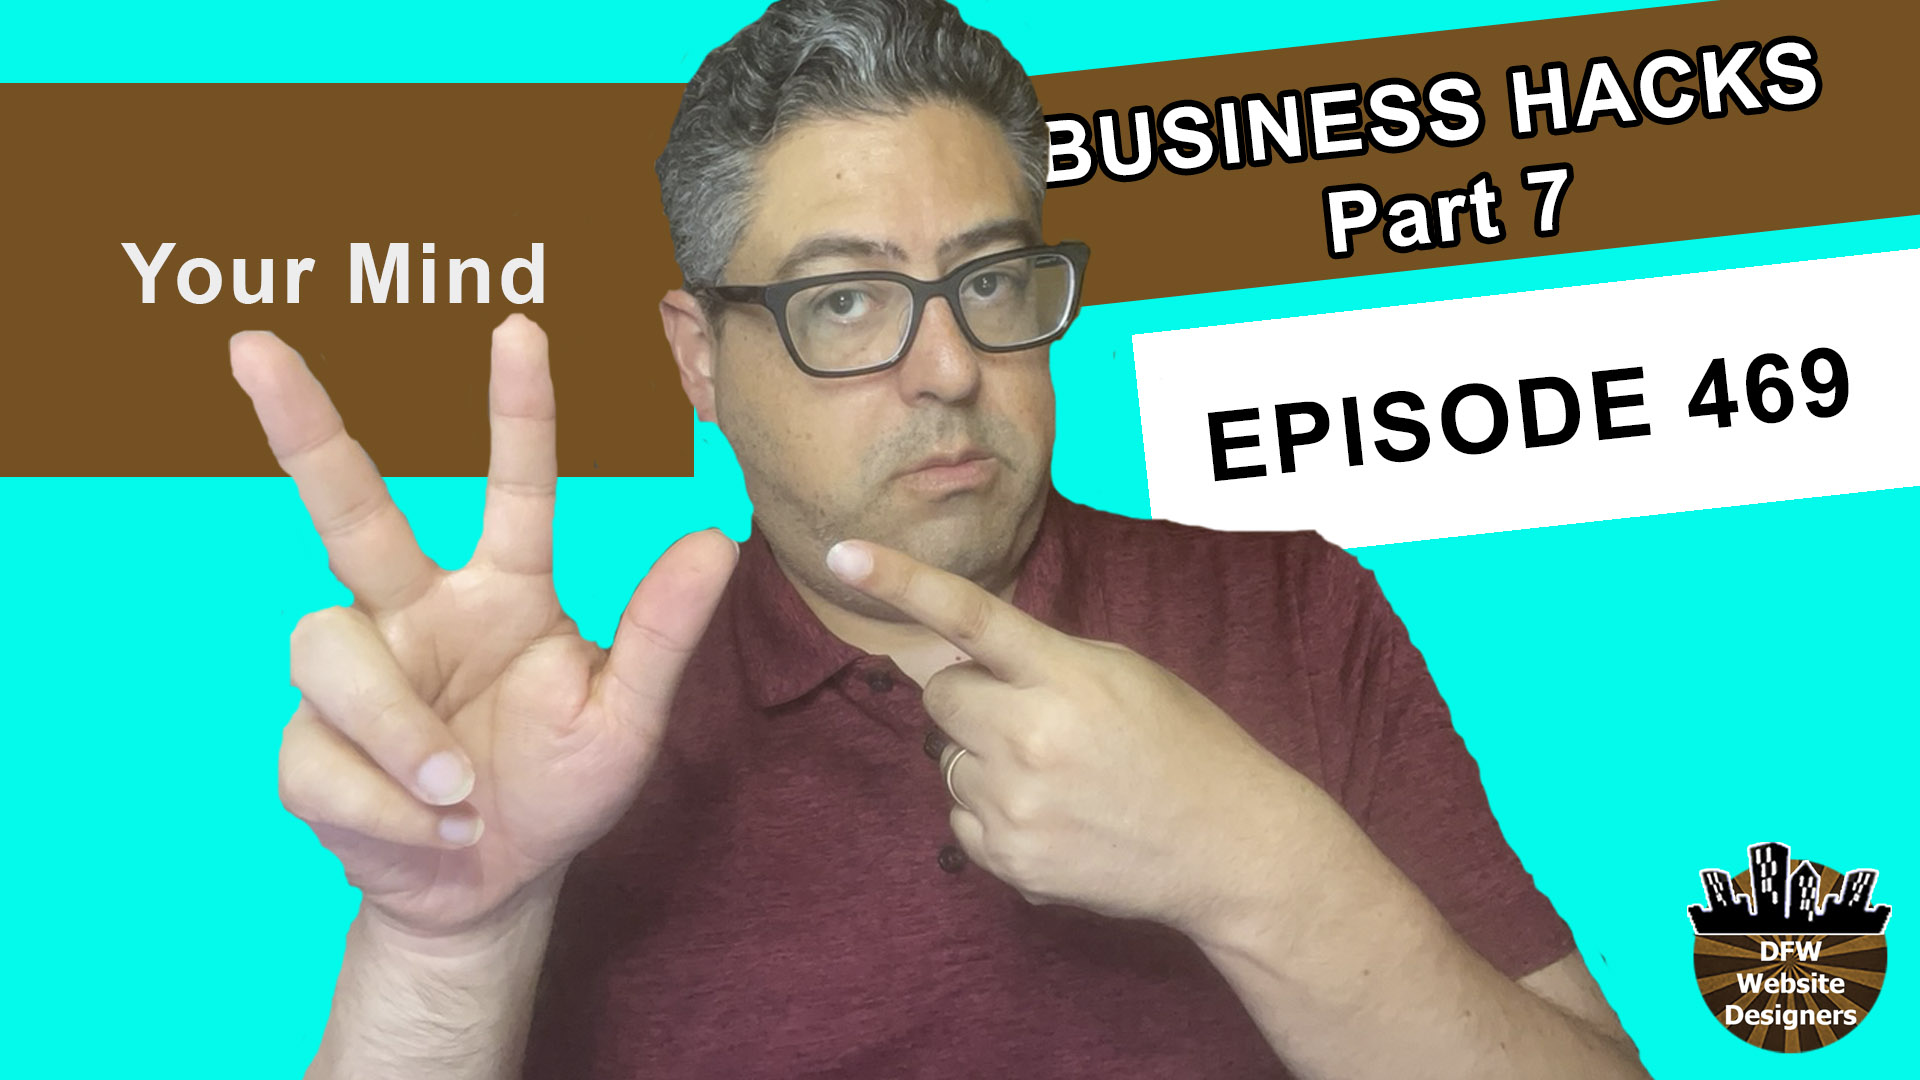 Episode 469 Business Hacks Part 7 Your Mind:  3 Steps Ahead, Make Your Own Luck, Fail Often